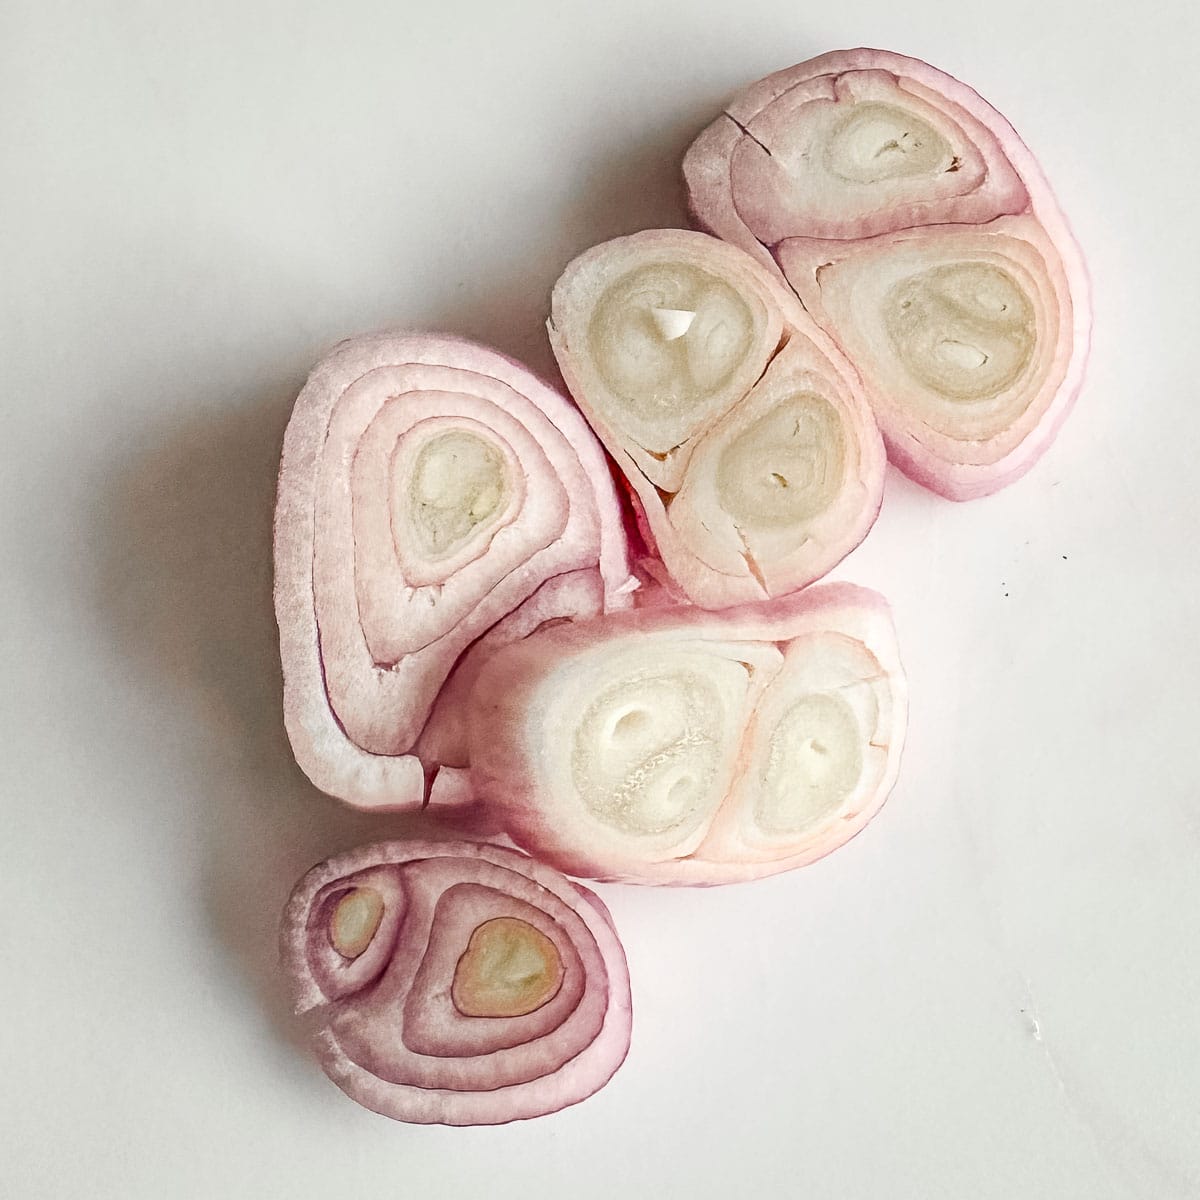 Sliced shallots on a white surface.